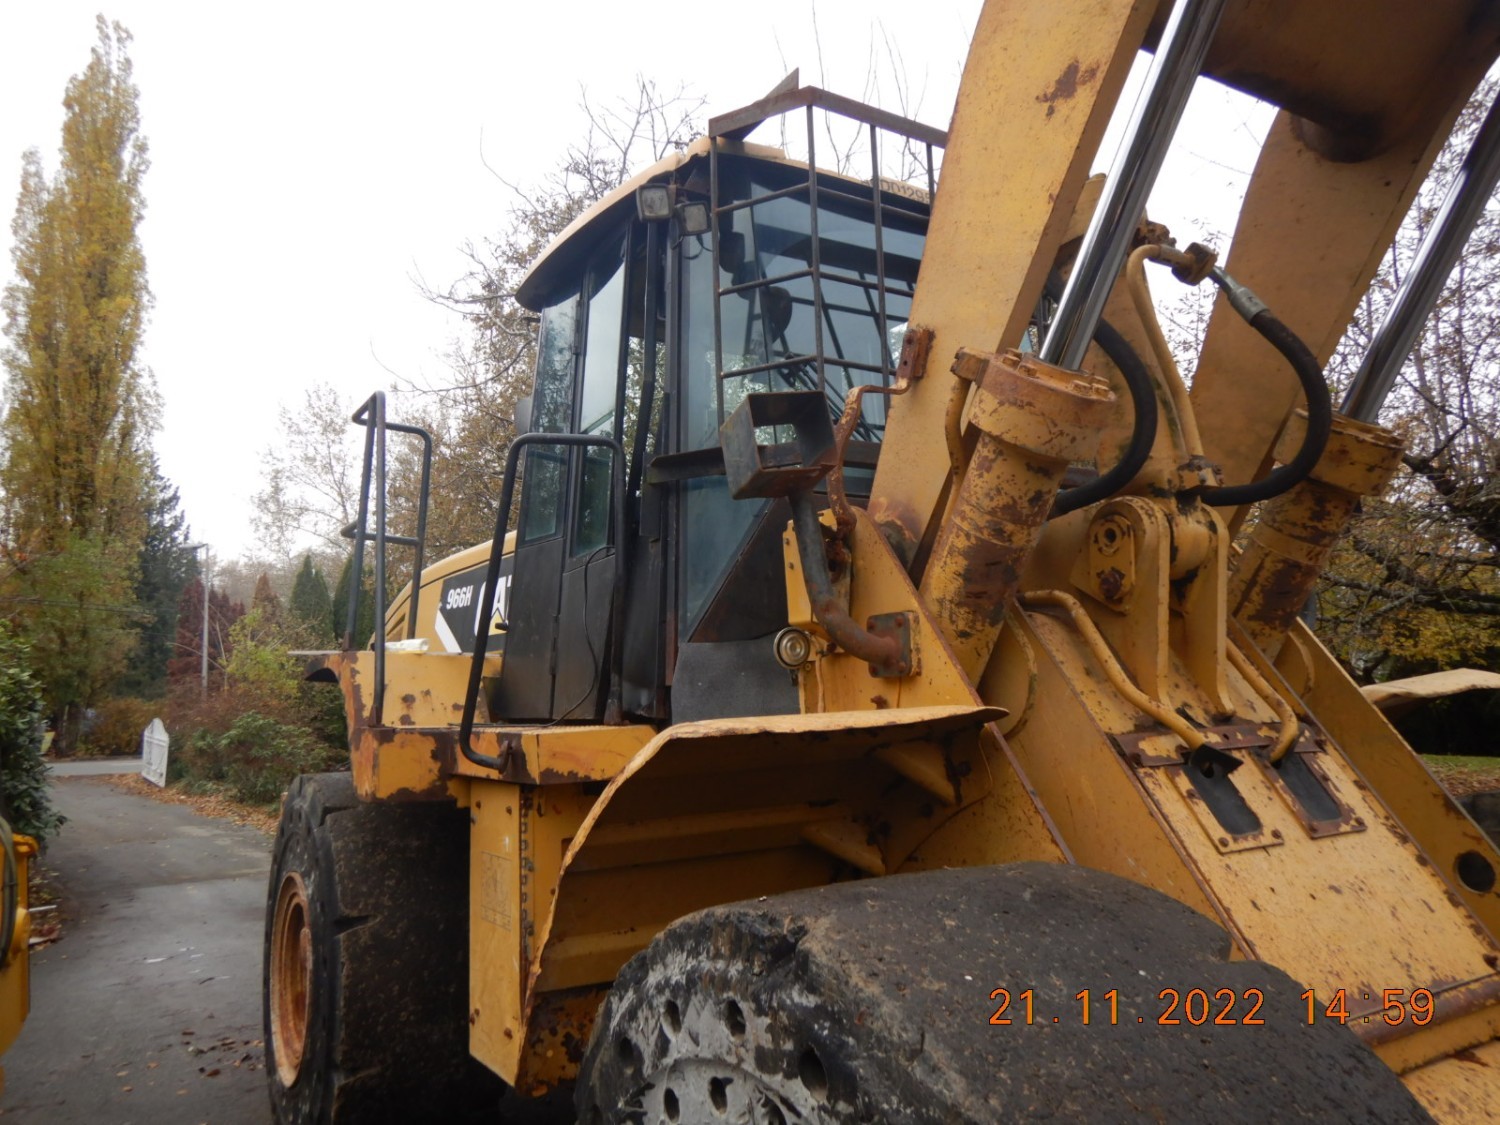 sold-2010-cat-966h-cw-custom-daequip-dual-log-or-pipe-grapple-with-internal-grapple-to-keep-pipe-logs-poles-secure-big-9